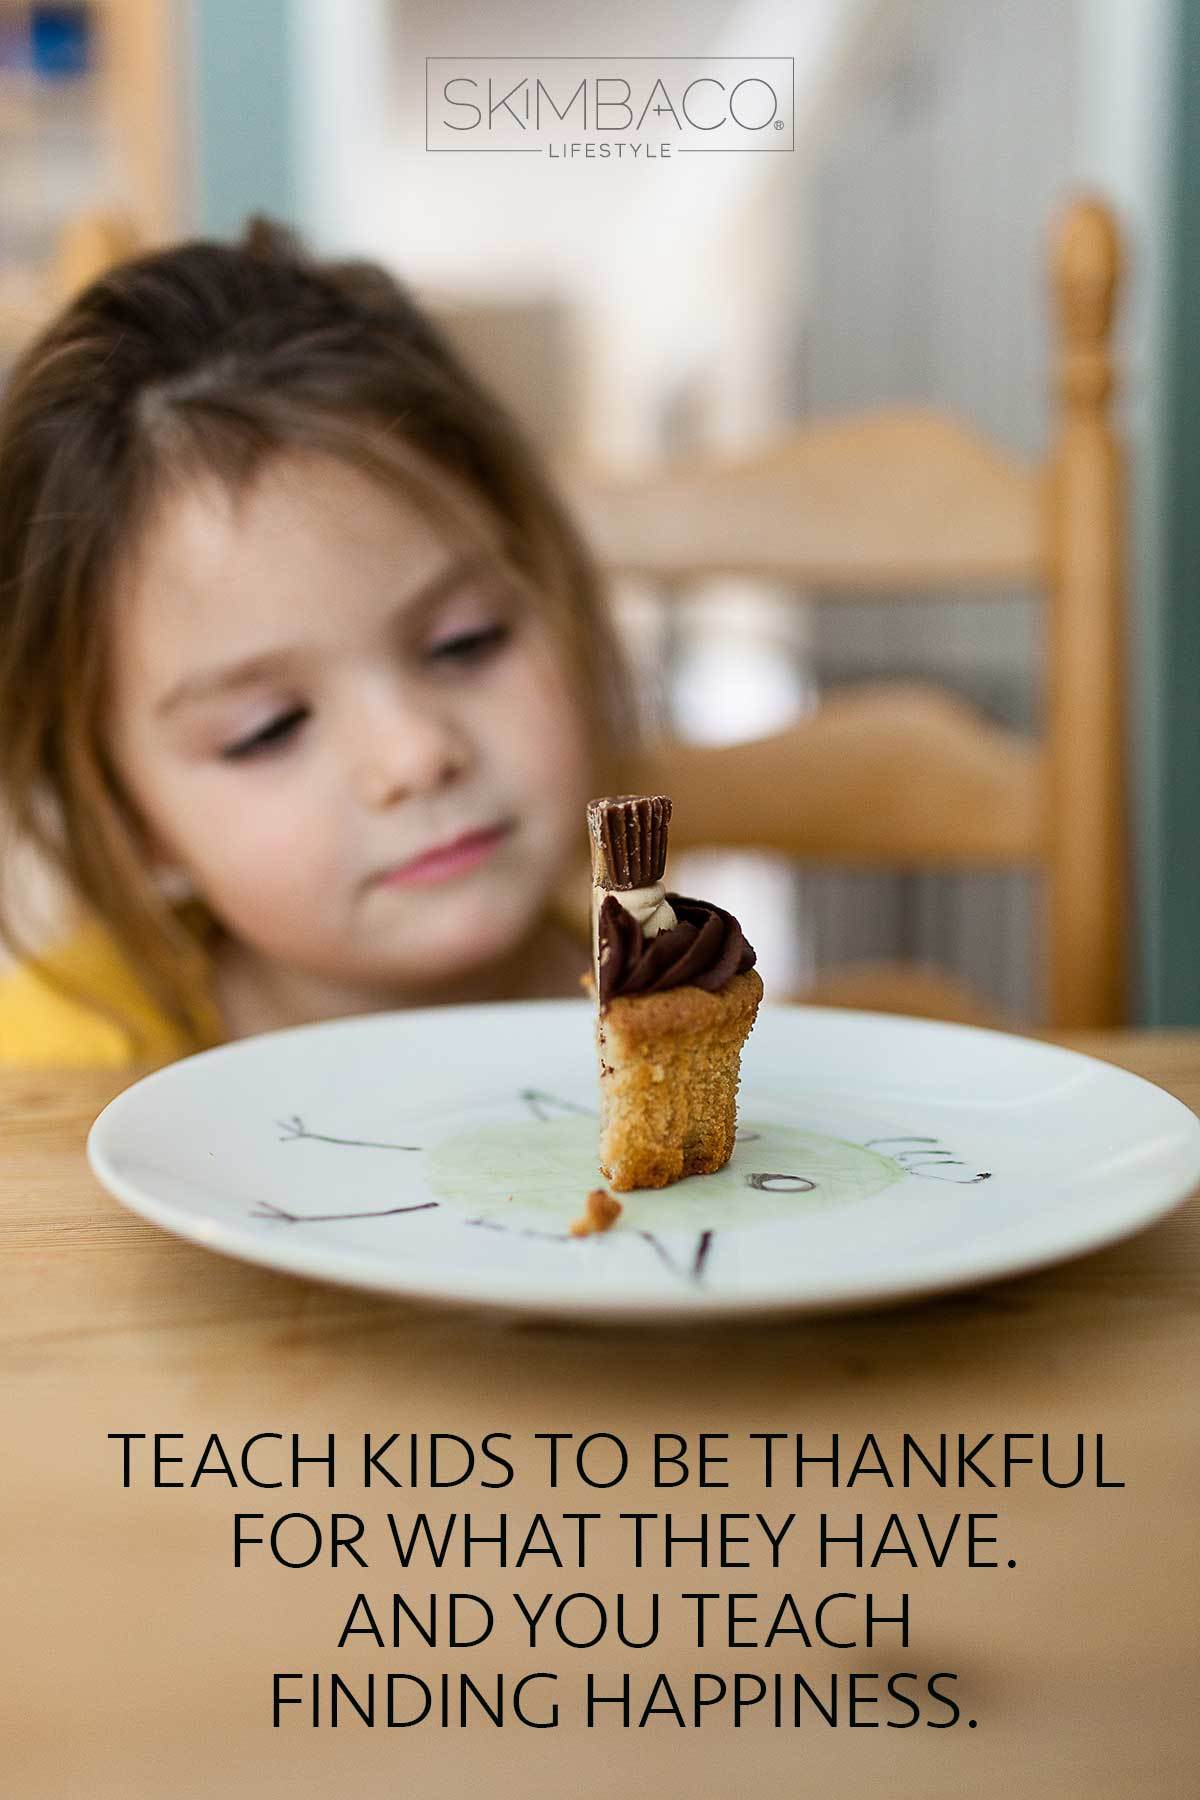 Teach children to be thankful for what they have. And you teach finding happiness. @skimbaco